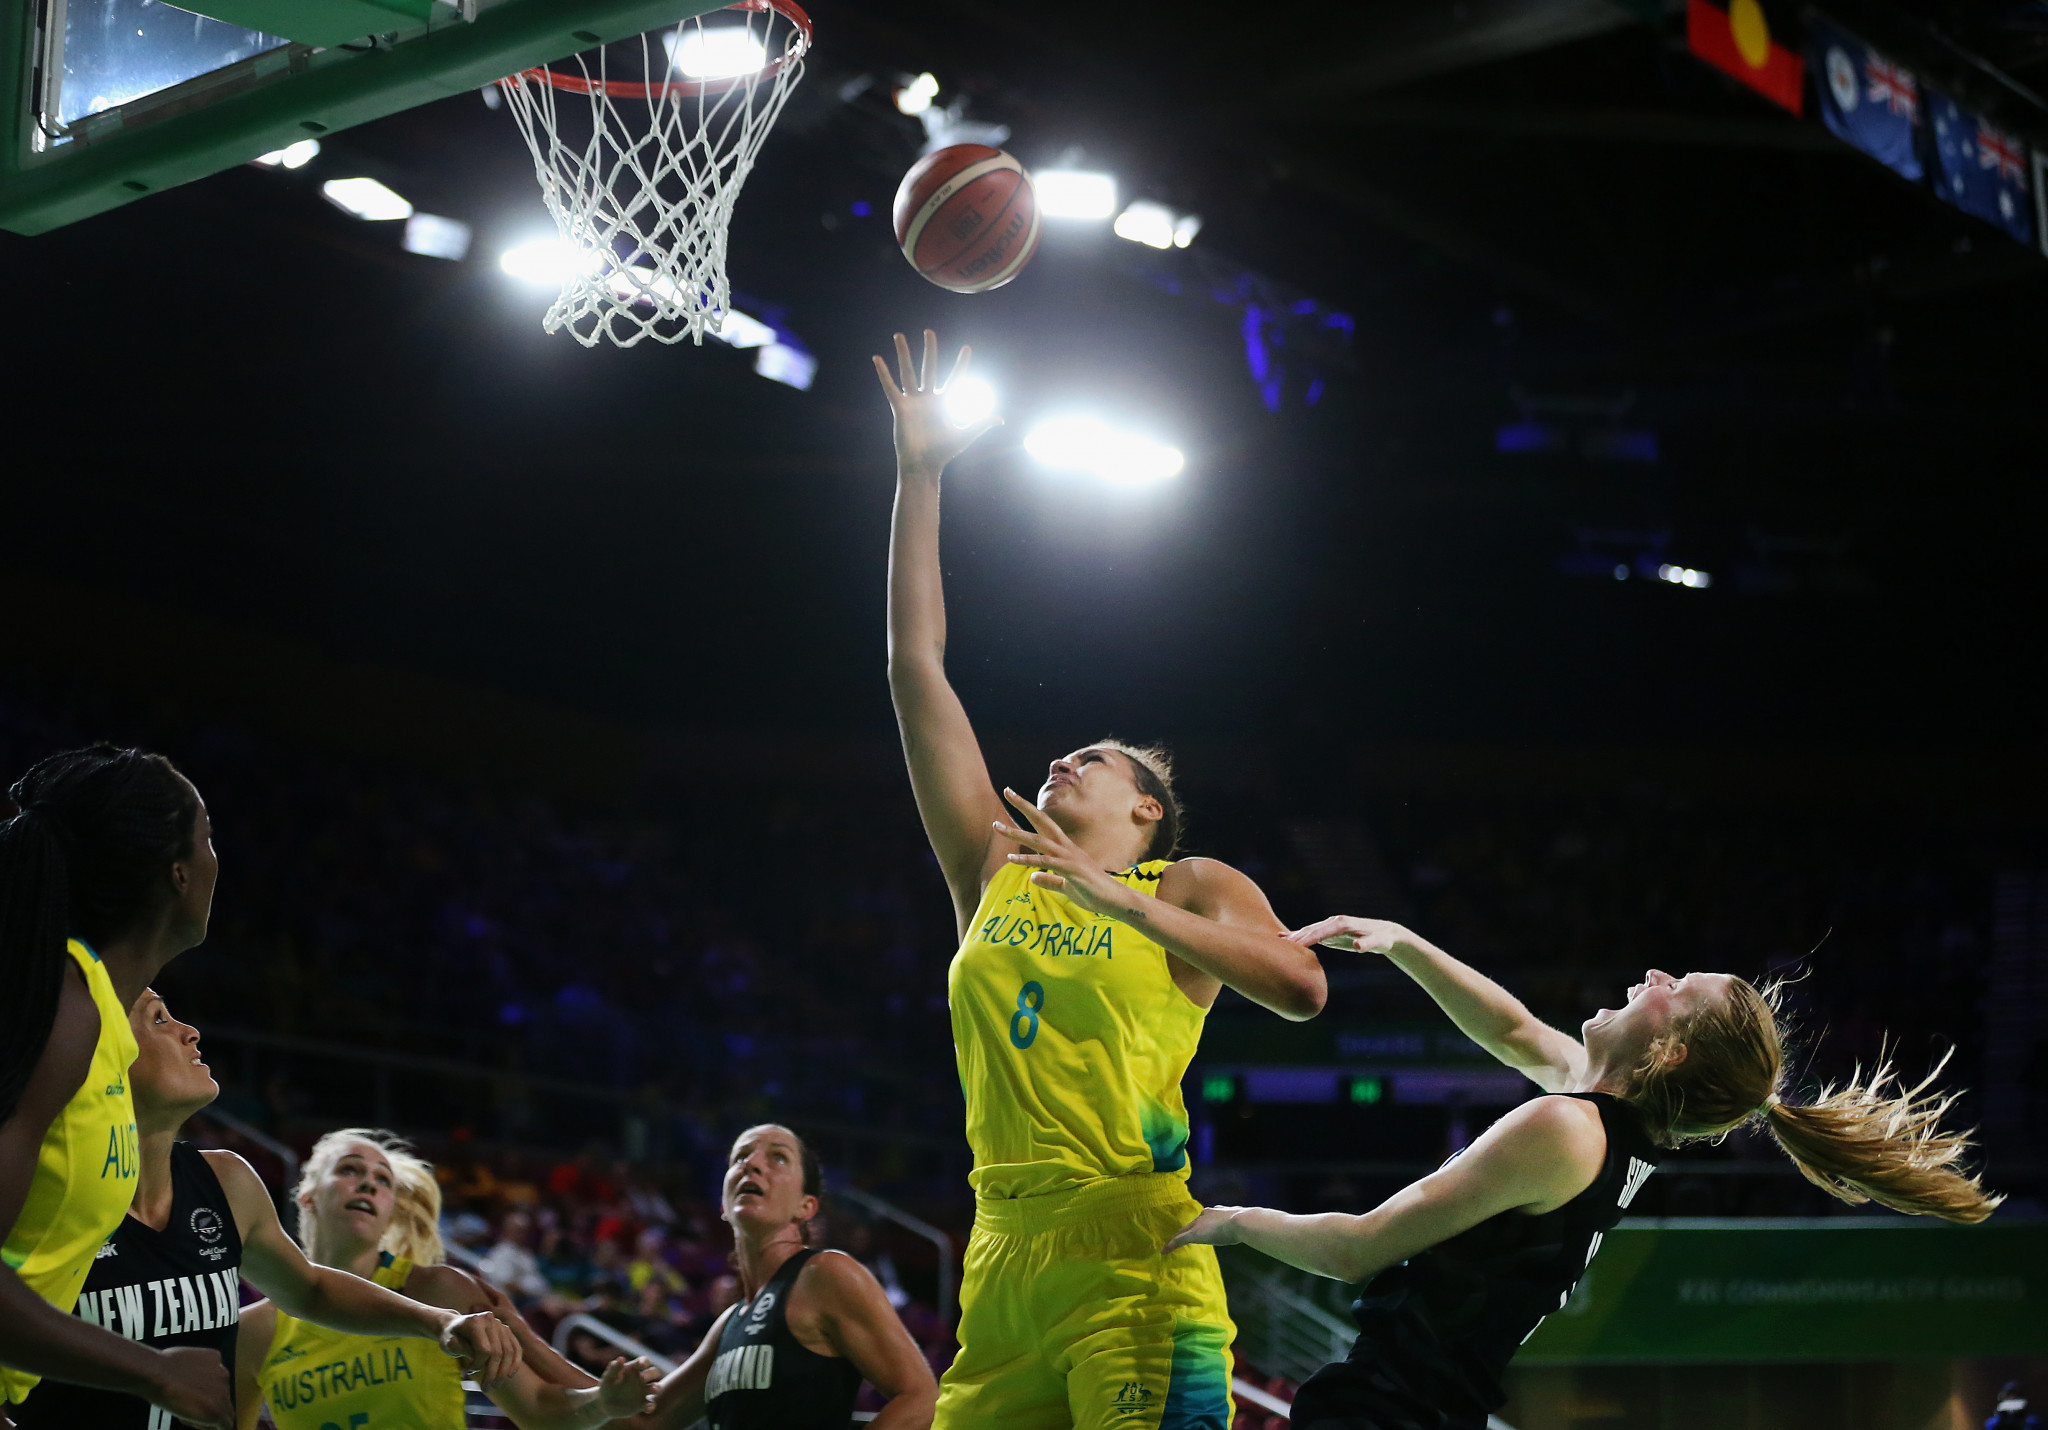 Liz Cambage admitted "things got heated" in Australia's game against Nigeria ©Getty Images